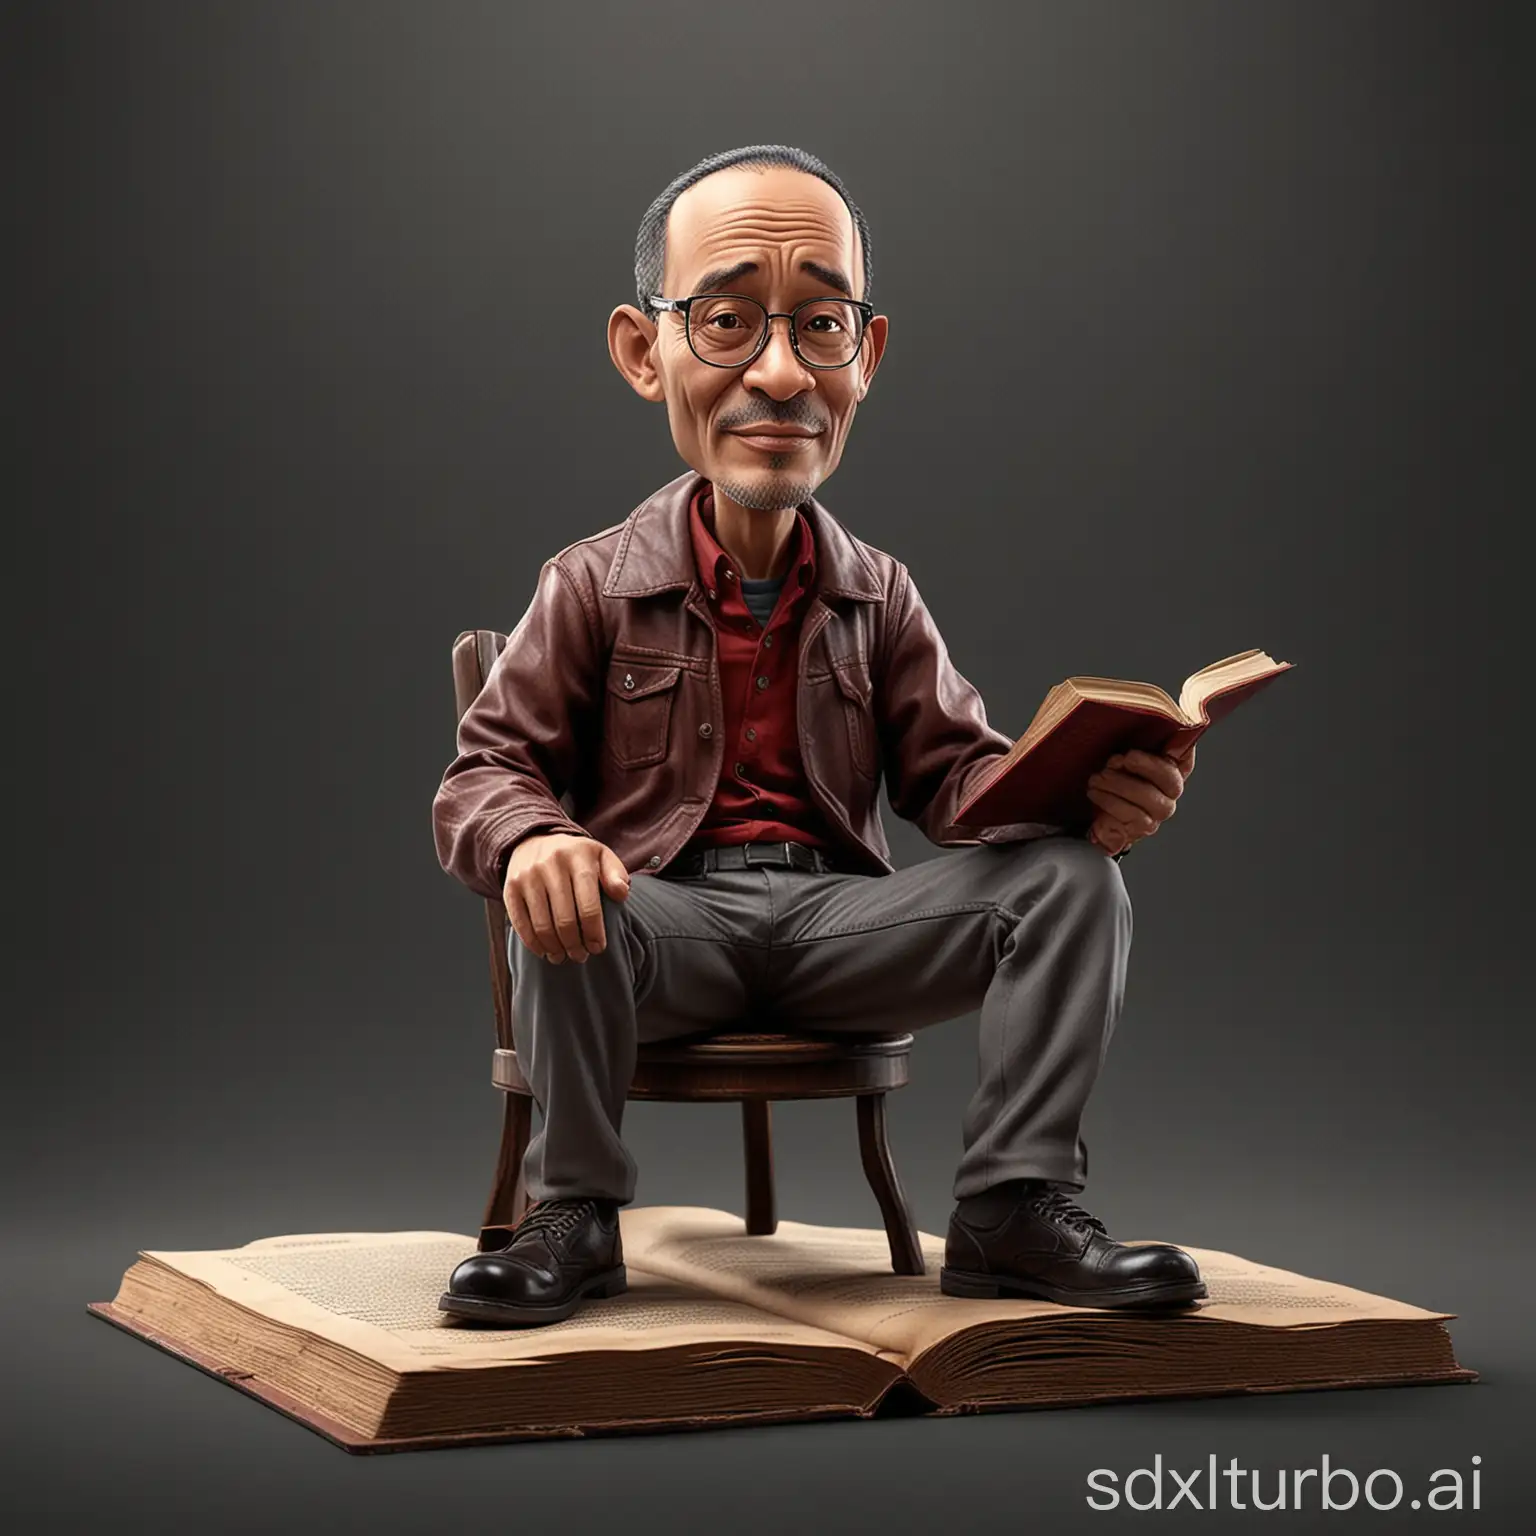 Create caricatures 3D realistic cartoon style full body with big head. A 50 year old Indonesian man with. Sit relaxed in a chair with dark red wing backs. Wearing a pair of jacket and gray trousers that looked worn. Wearing dark brown shoes. The right hand holds a clear glass filled with black liquid, the left hand is placed on a book on a round wooden table with a classic model. Focused gaze looking at the book. The background color is dark gray. Use soft photographic lighting, dramatic overhead lighting, very high image quality, clear character details, UHD, 16k, 3d Rendering, very realistic.